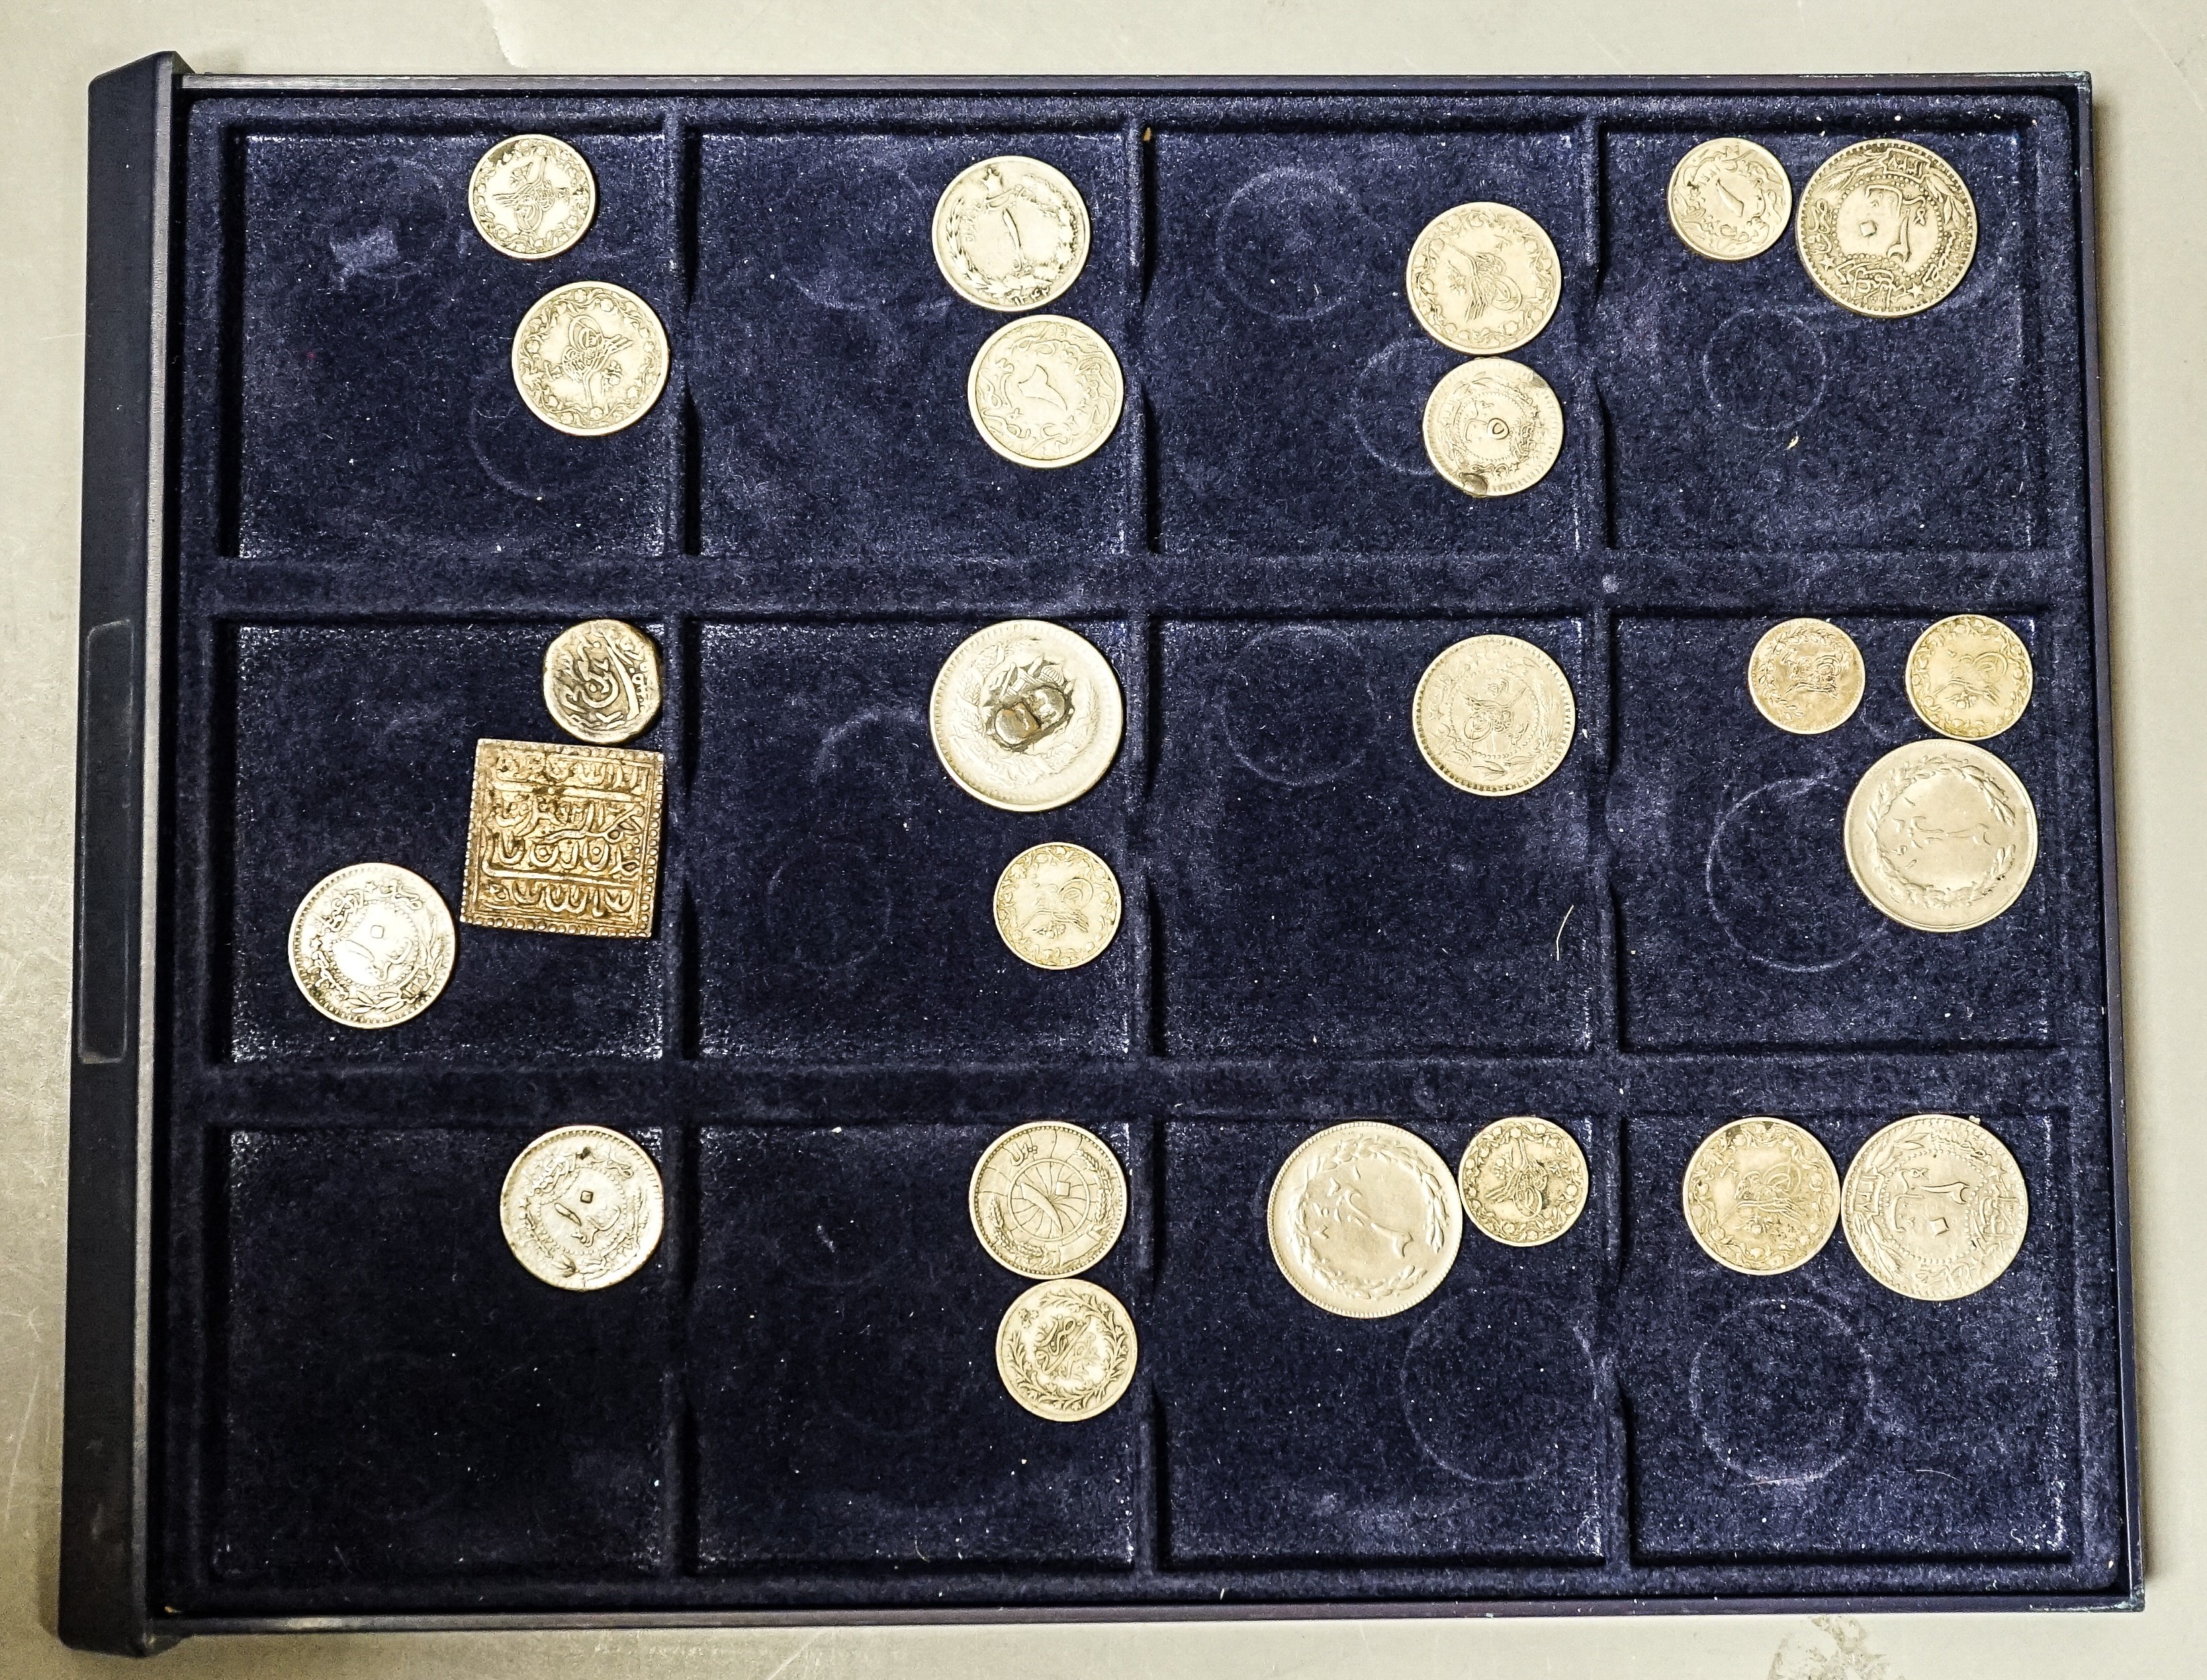 Ottoman Empire and Islamic coins, 19th/20th century, silver and bronze coinage, 12 trays - Image 8 of 13